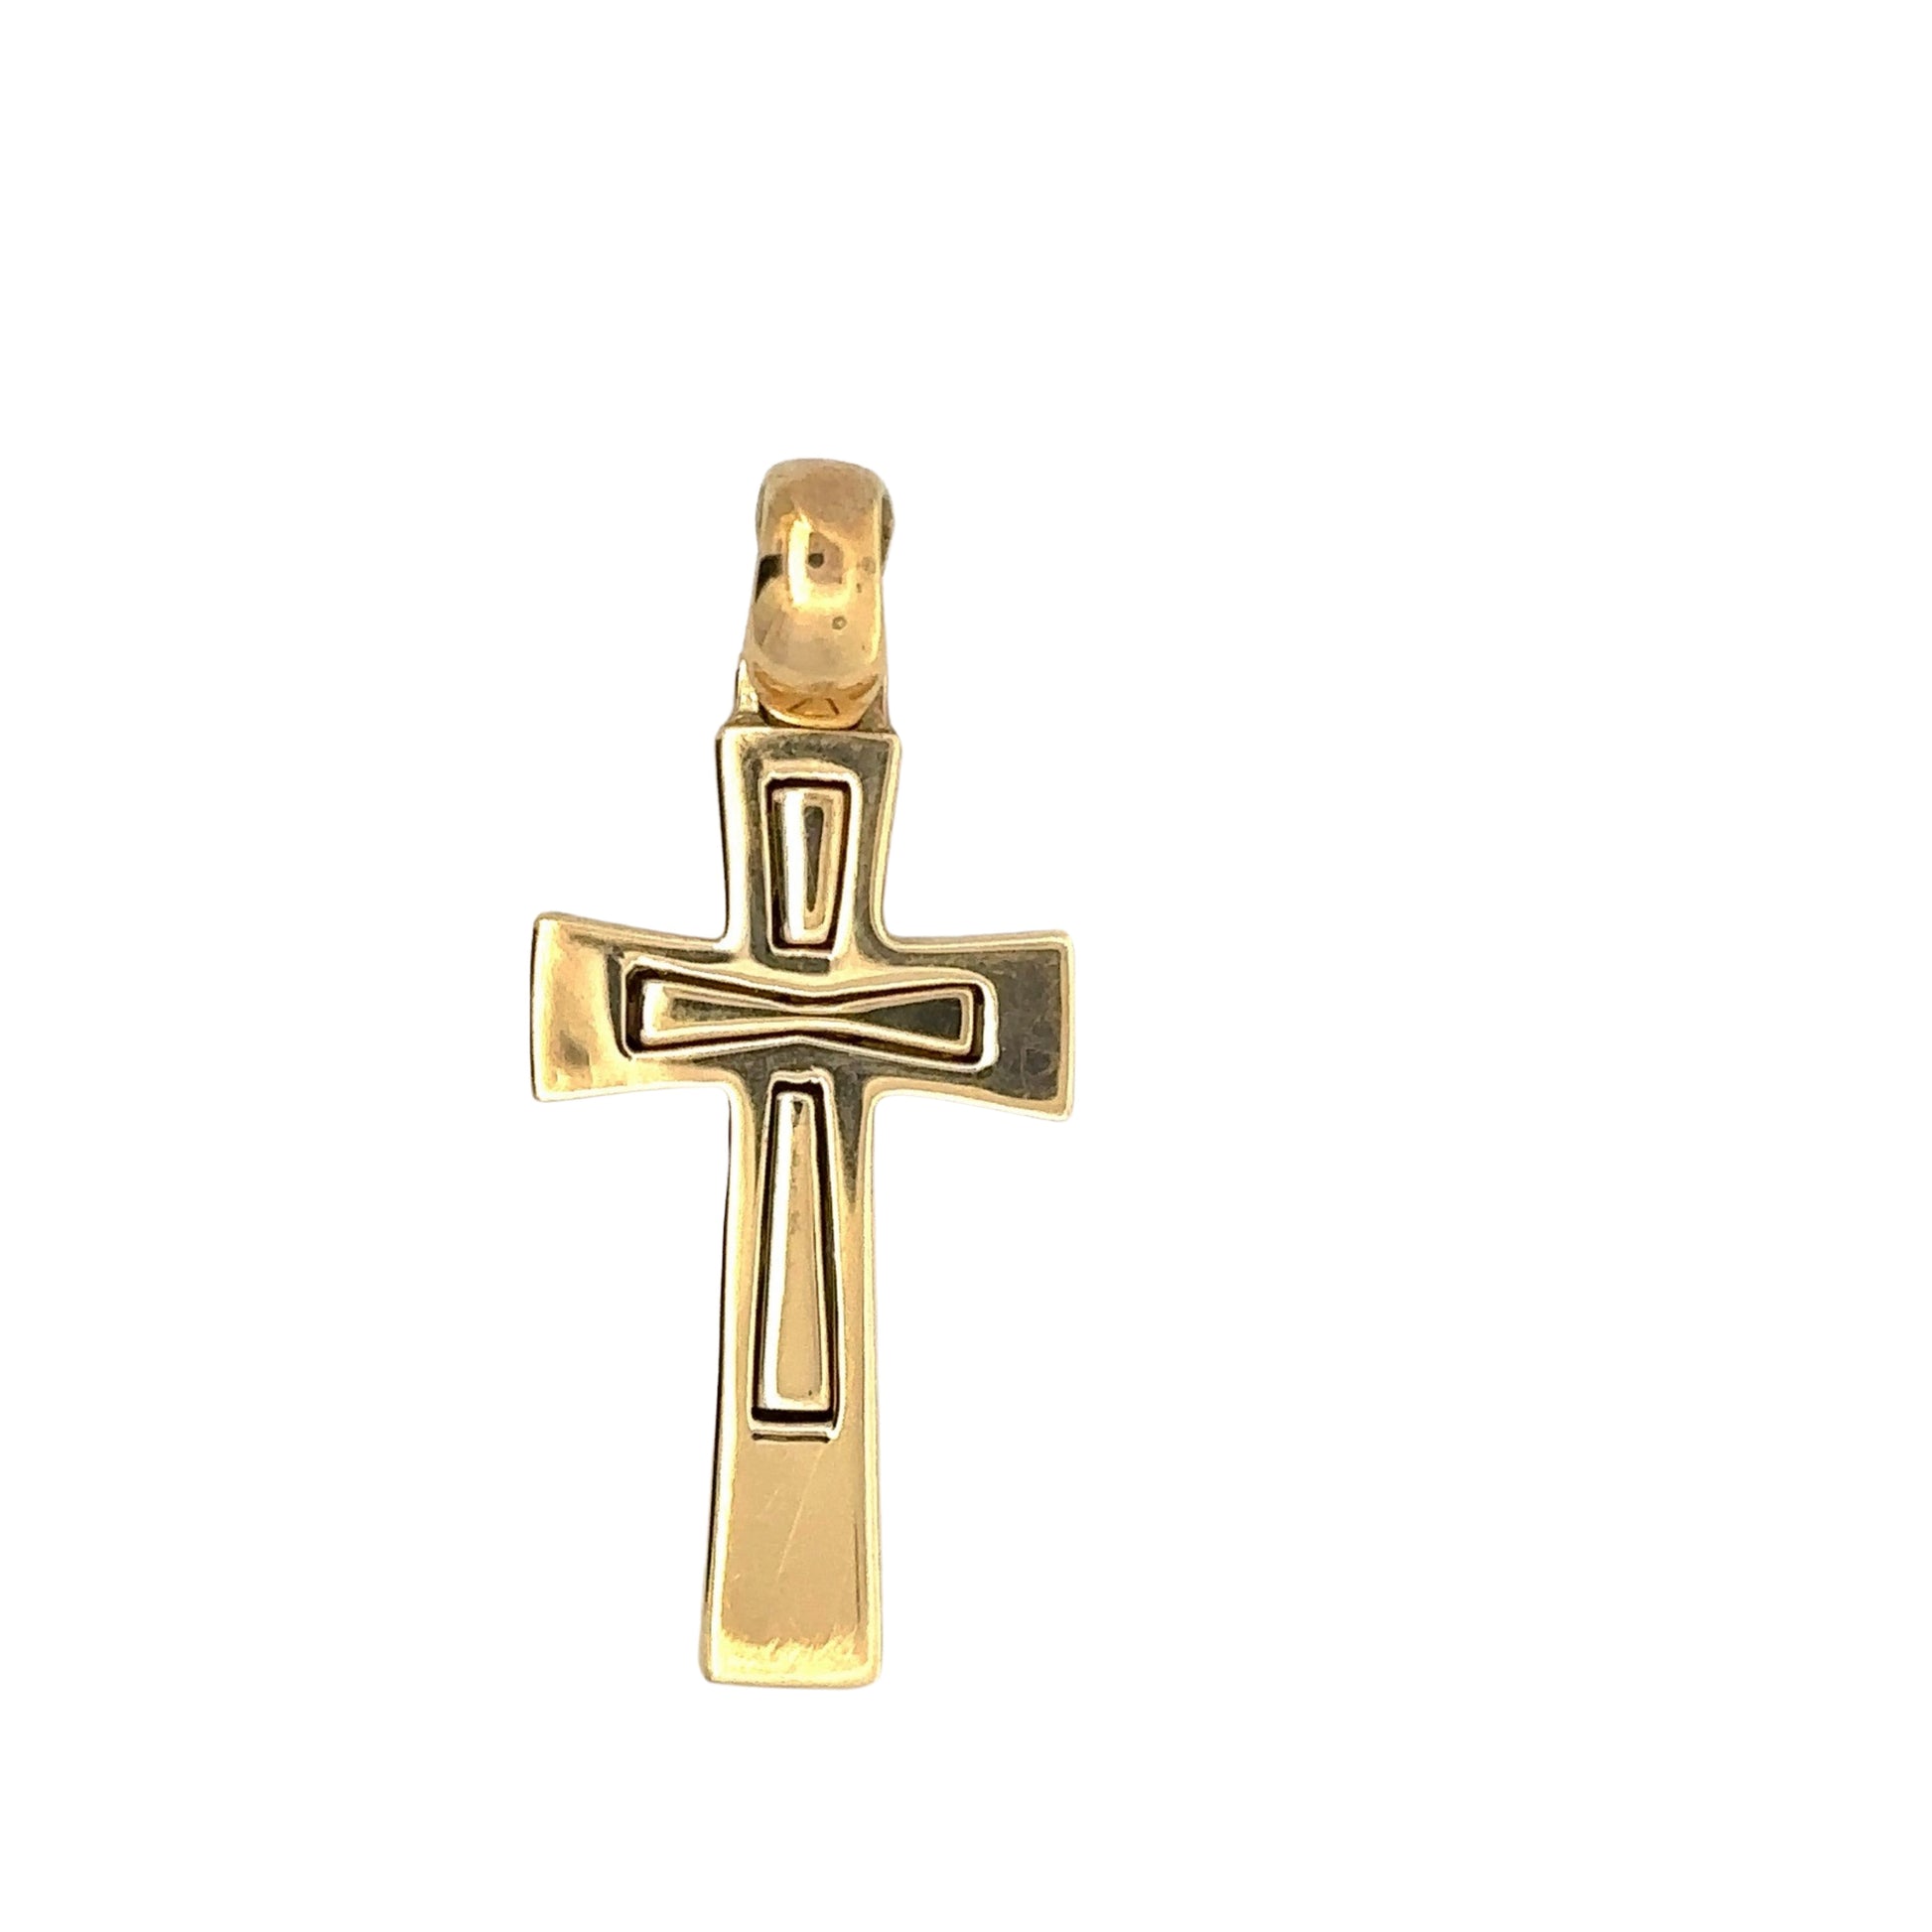 Front of yellow gold cross pendant with scratches